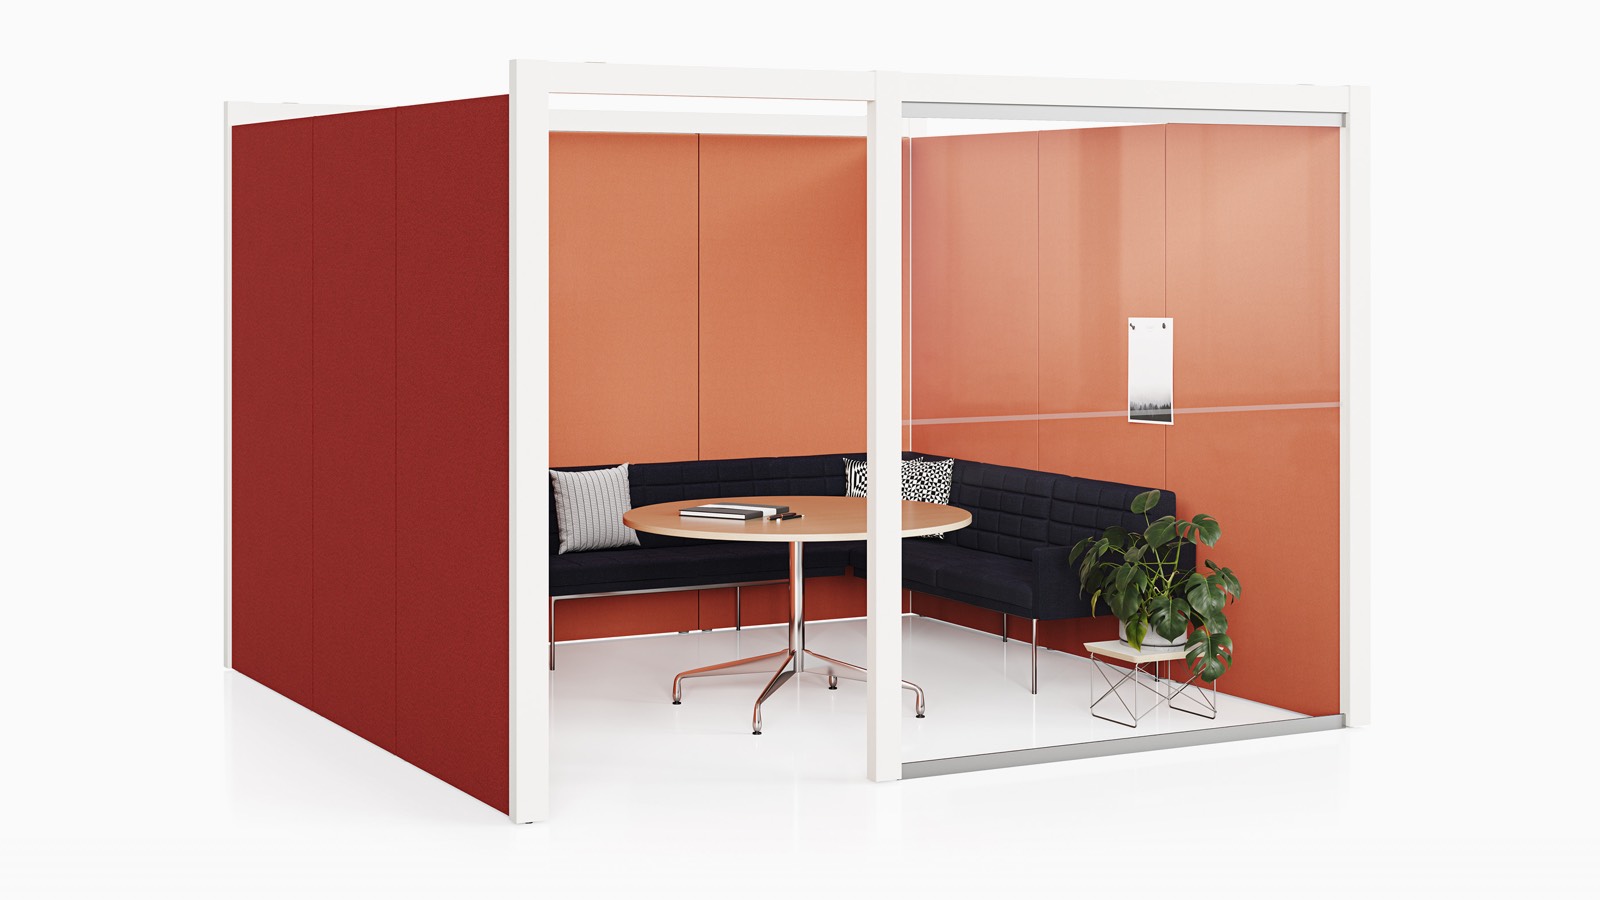 A semi-enclosed Overlay room with red tackable fabric and glass exterior walls with a couch and table inside.